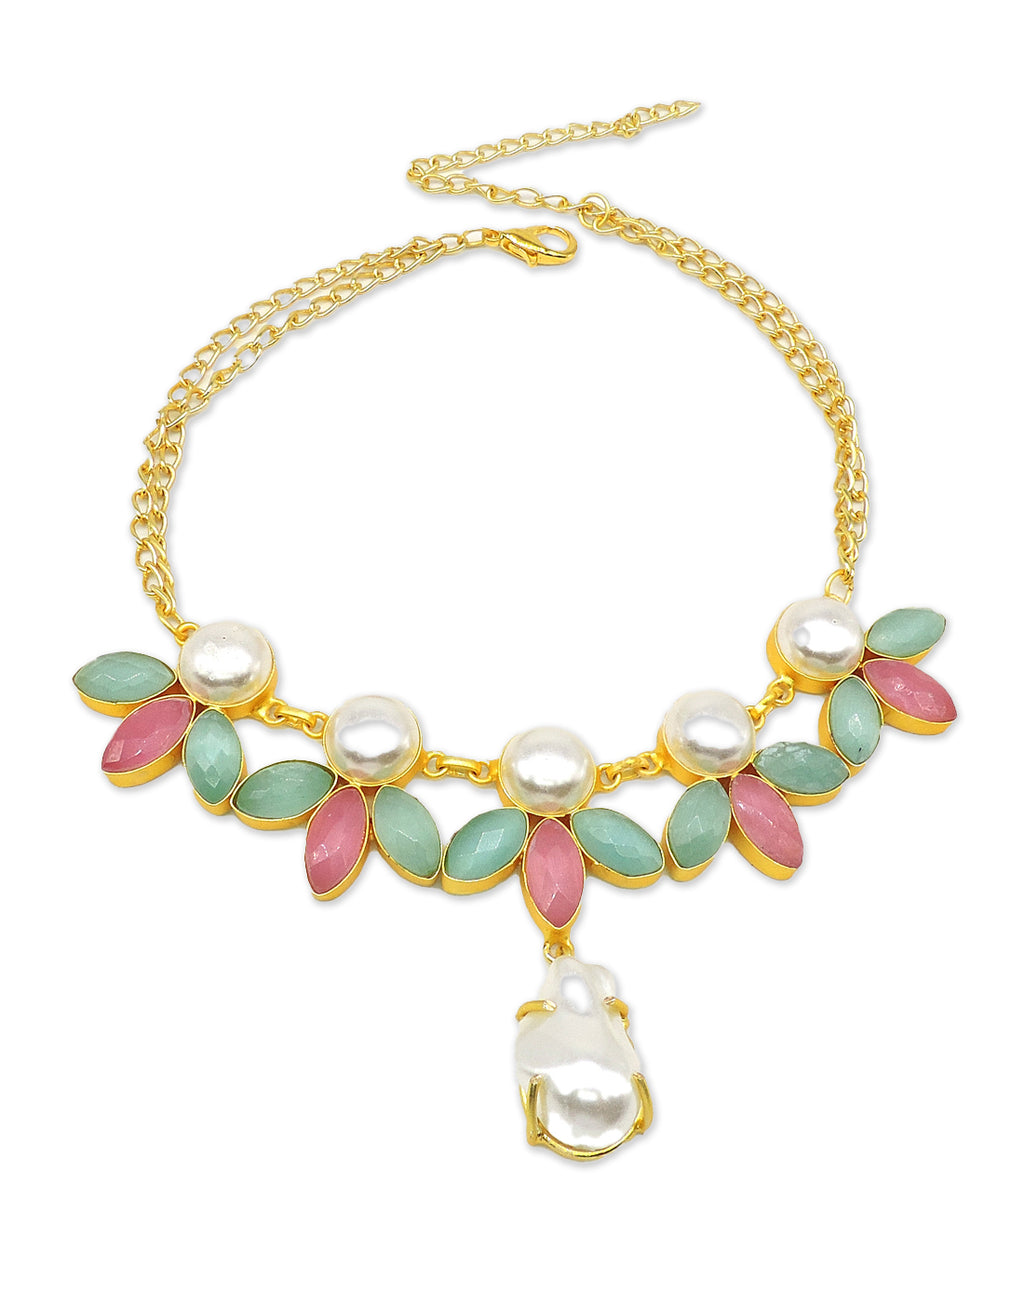 Butterfly Pearl Necklace - Statement Necklaces - Gold-Plated & Hypoallergenic Jewellery - Made in India - Dubai Jewellery - Dori